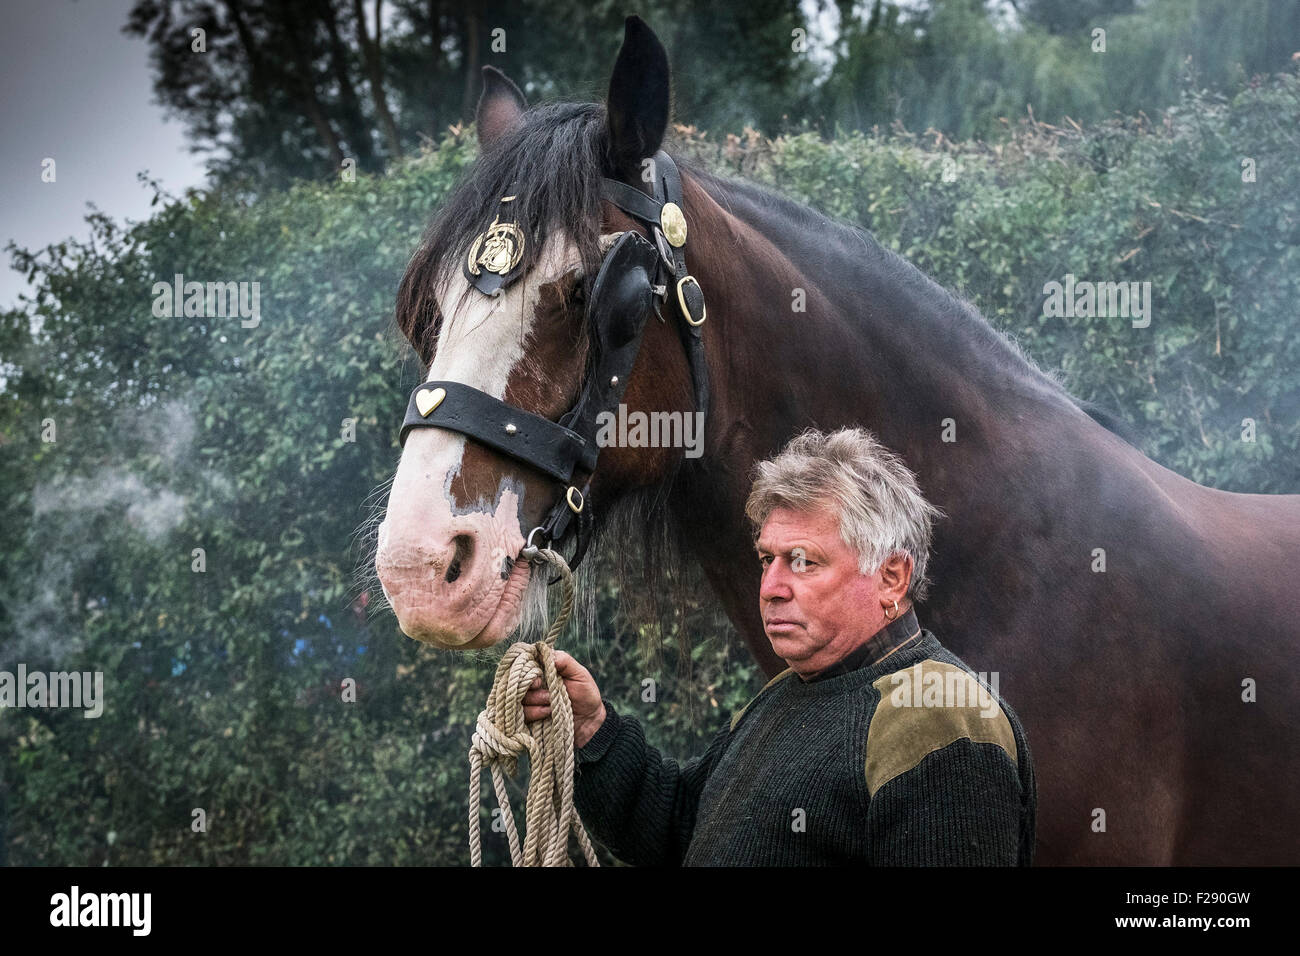 A Shire Horse and his owner at the Essex Country Show, Barleylands, Essex. Stock Photo